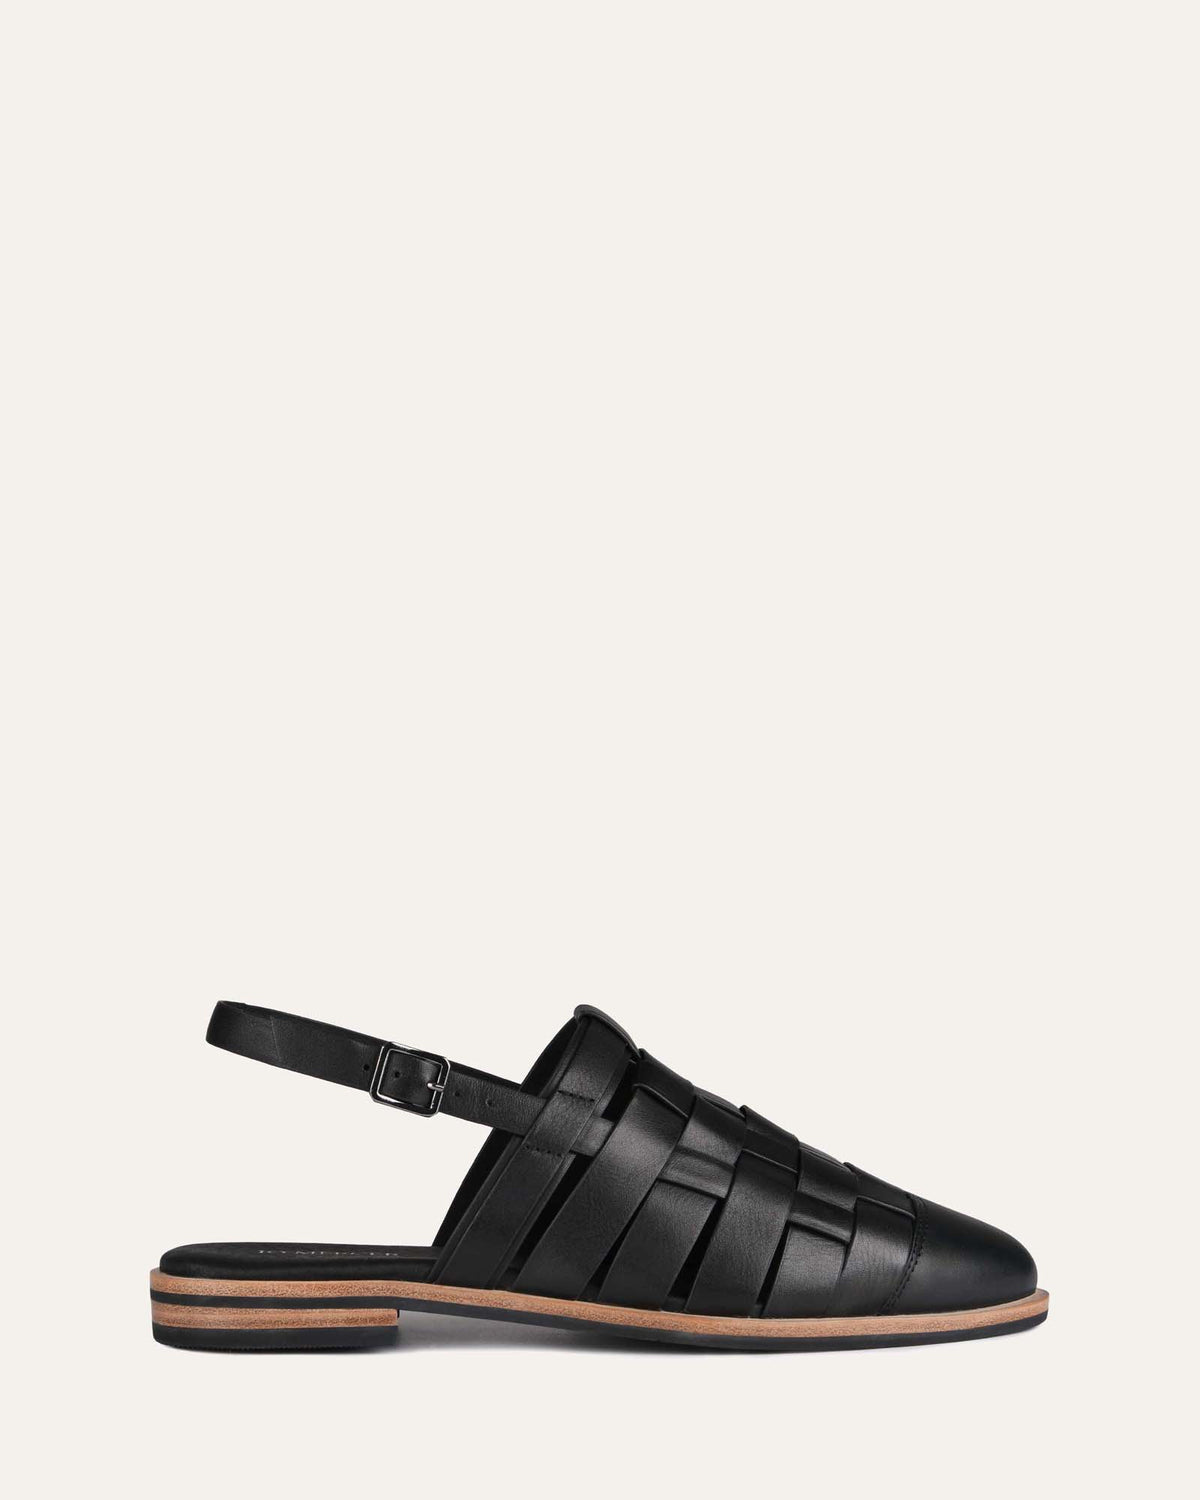 WALKER CASUAL FLATS BLACK LEATHER